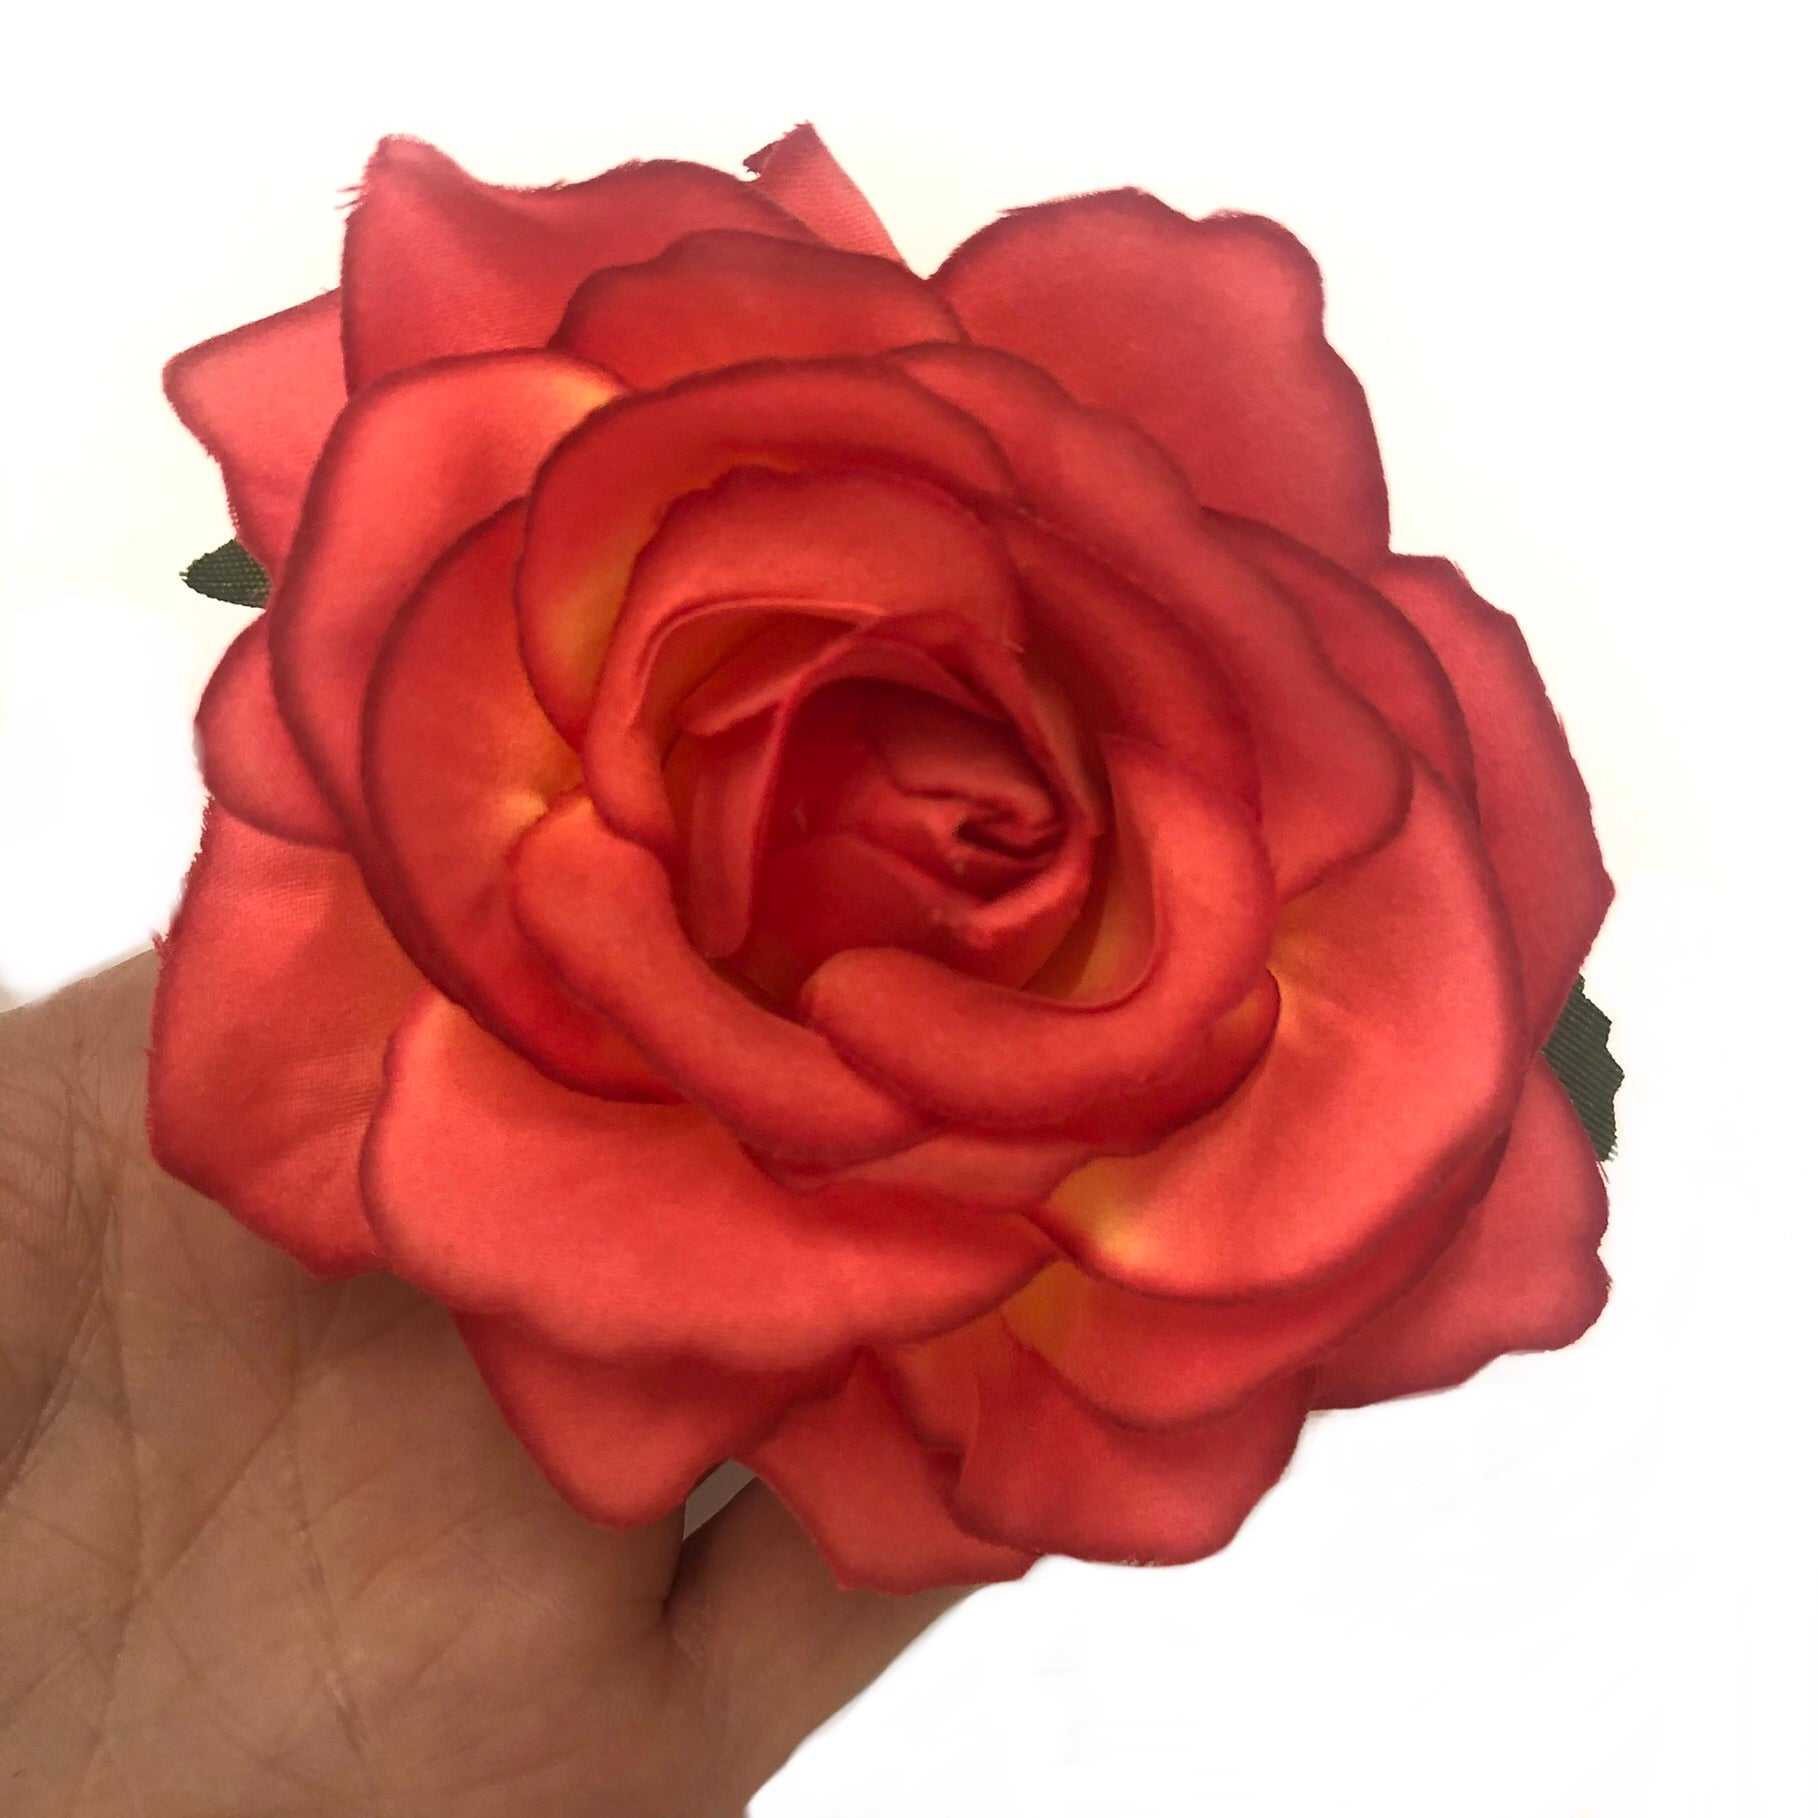 Artificial Silk Flower Head - Coral Rose Style 41 - 1pc